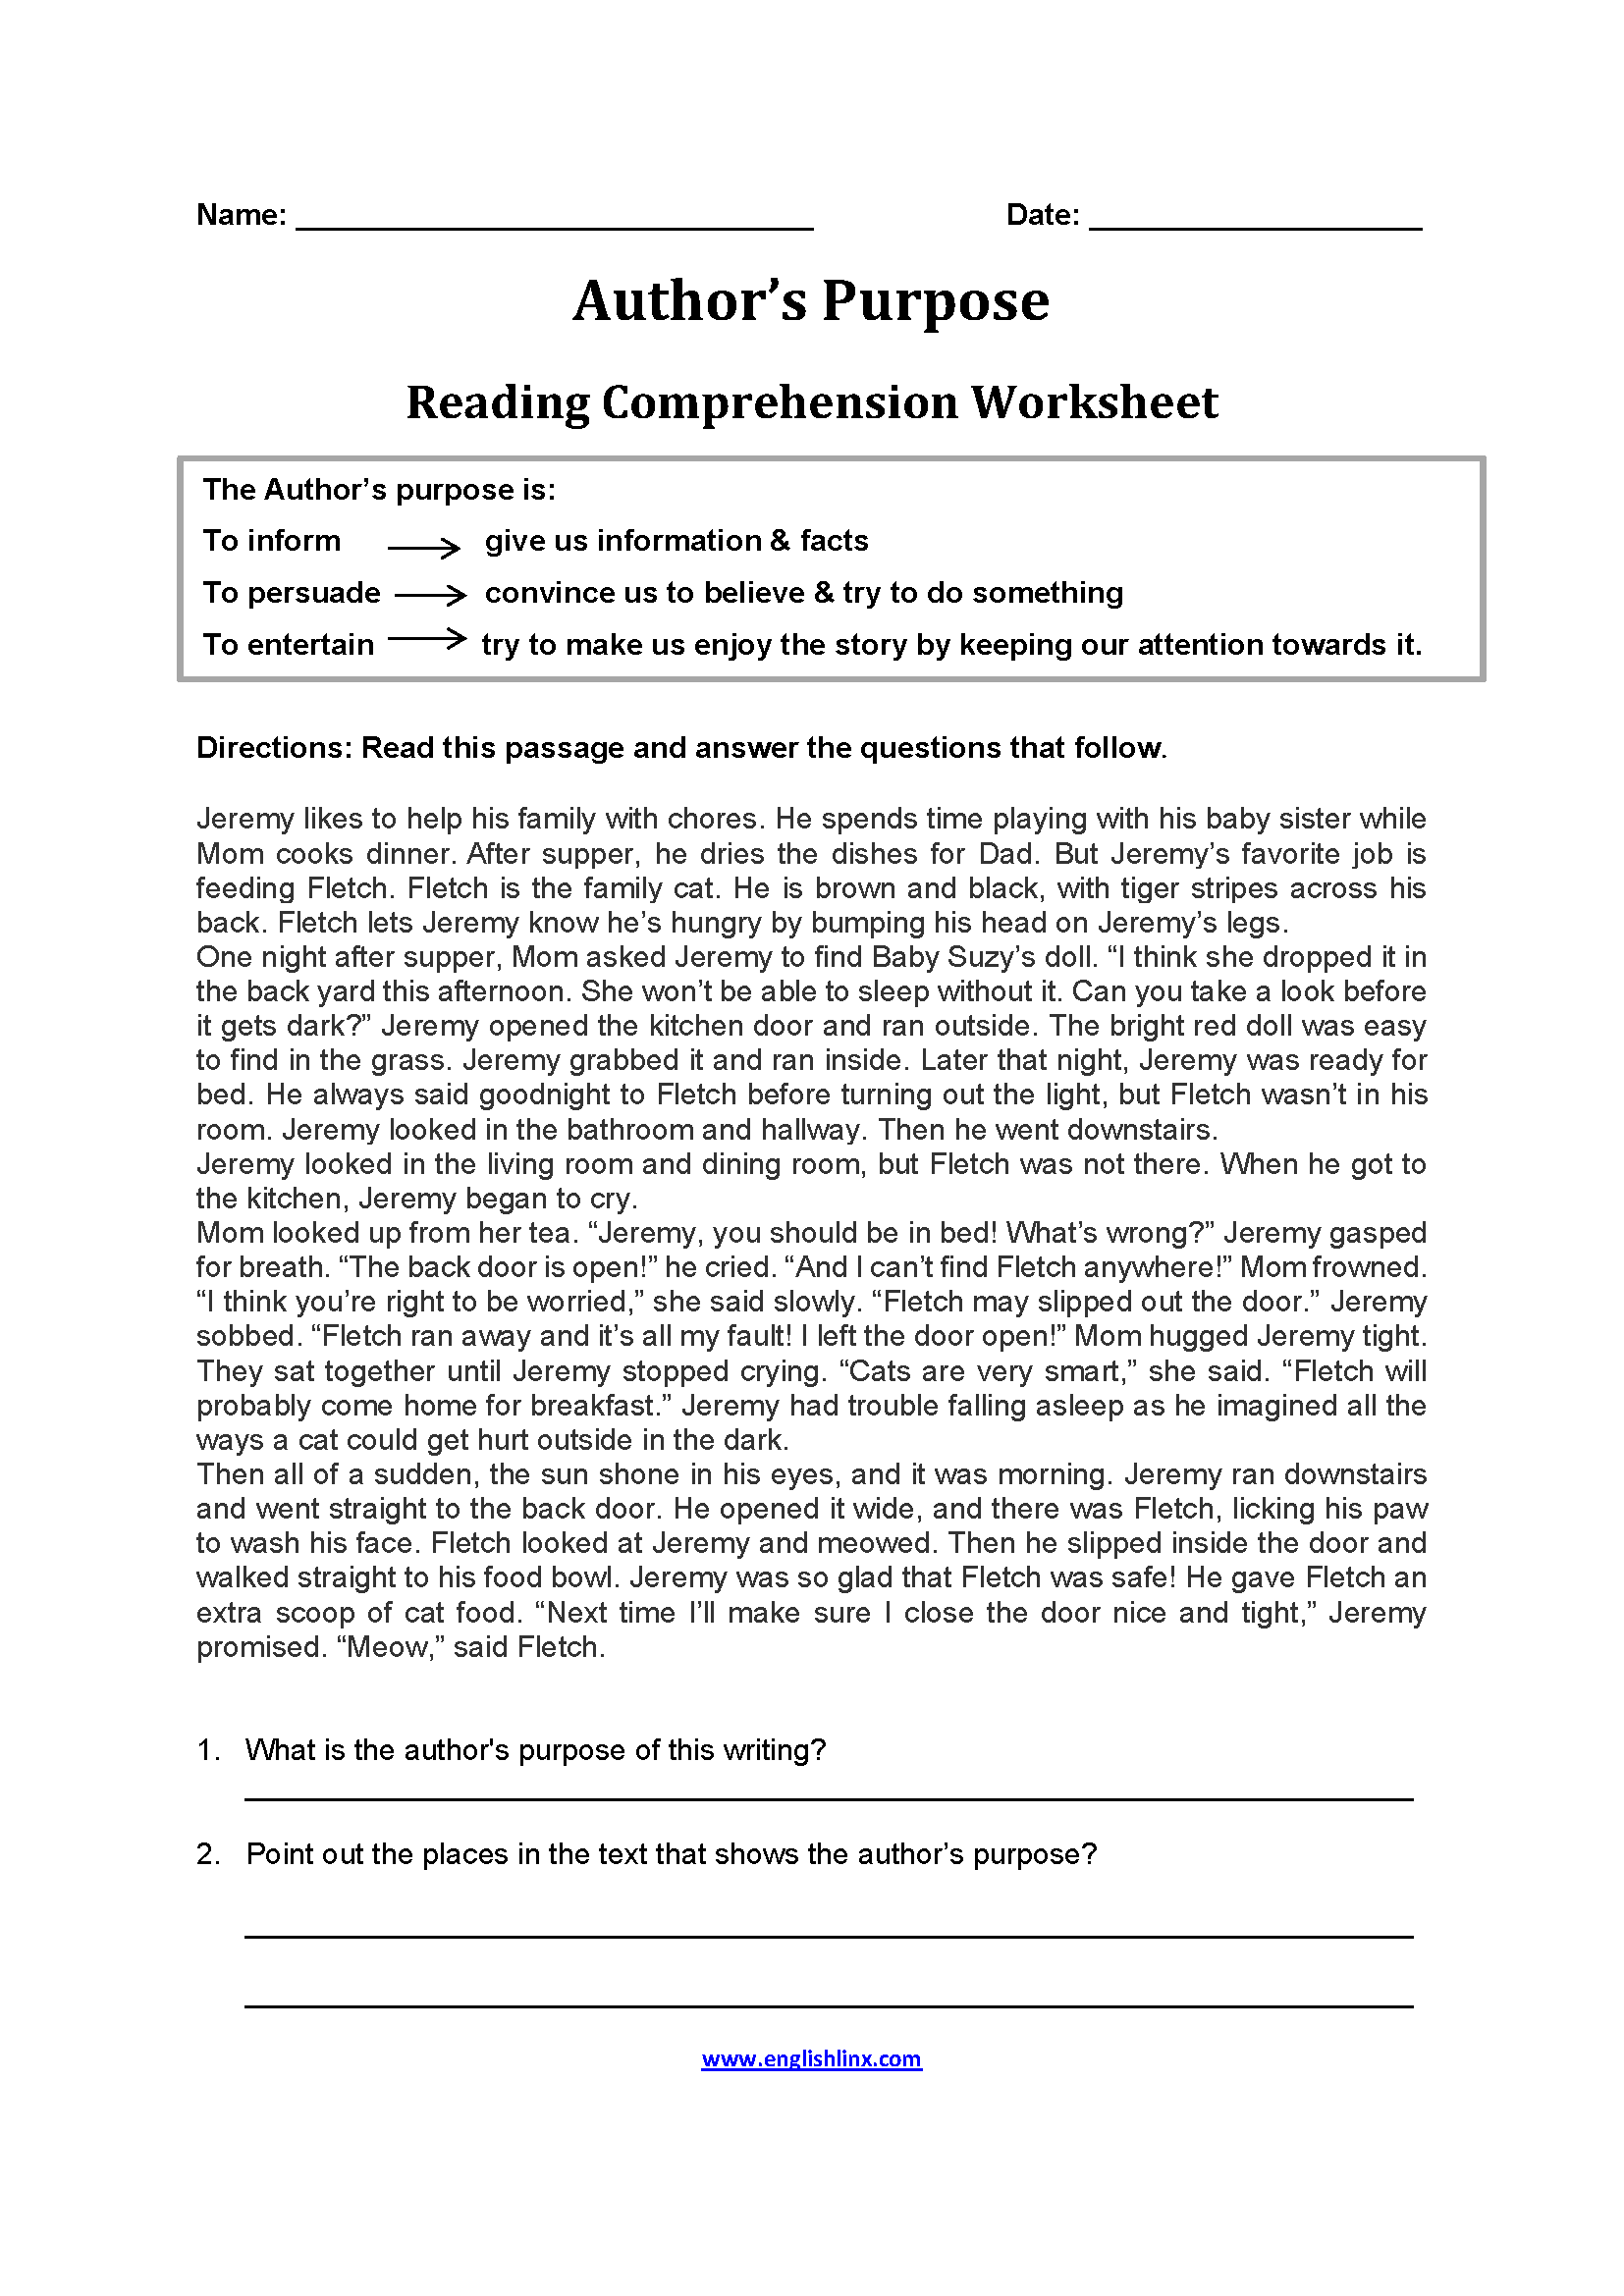 Reading Author's Purpose Worksheets